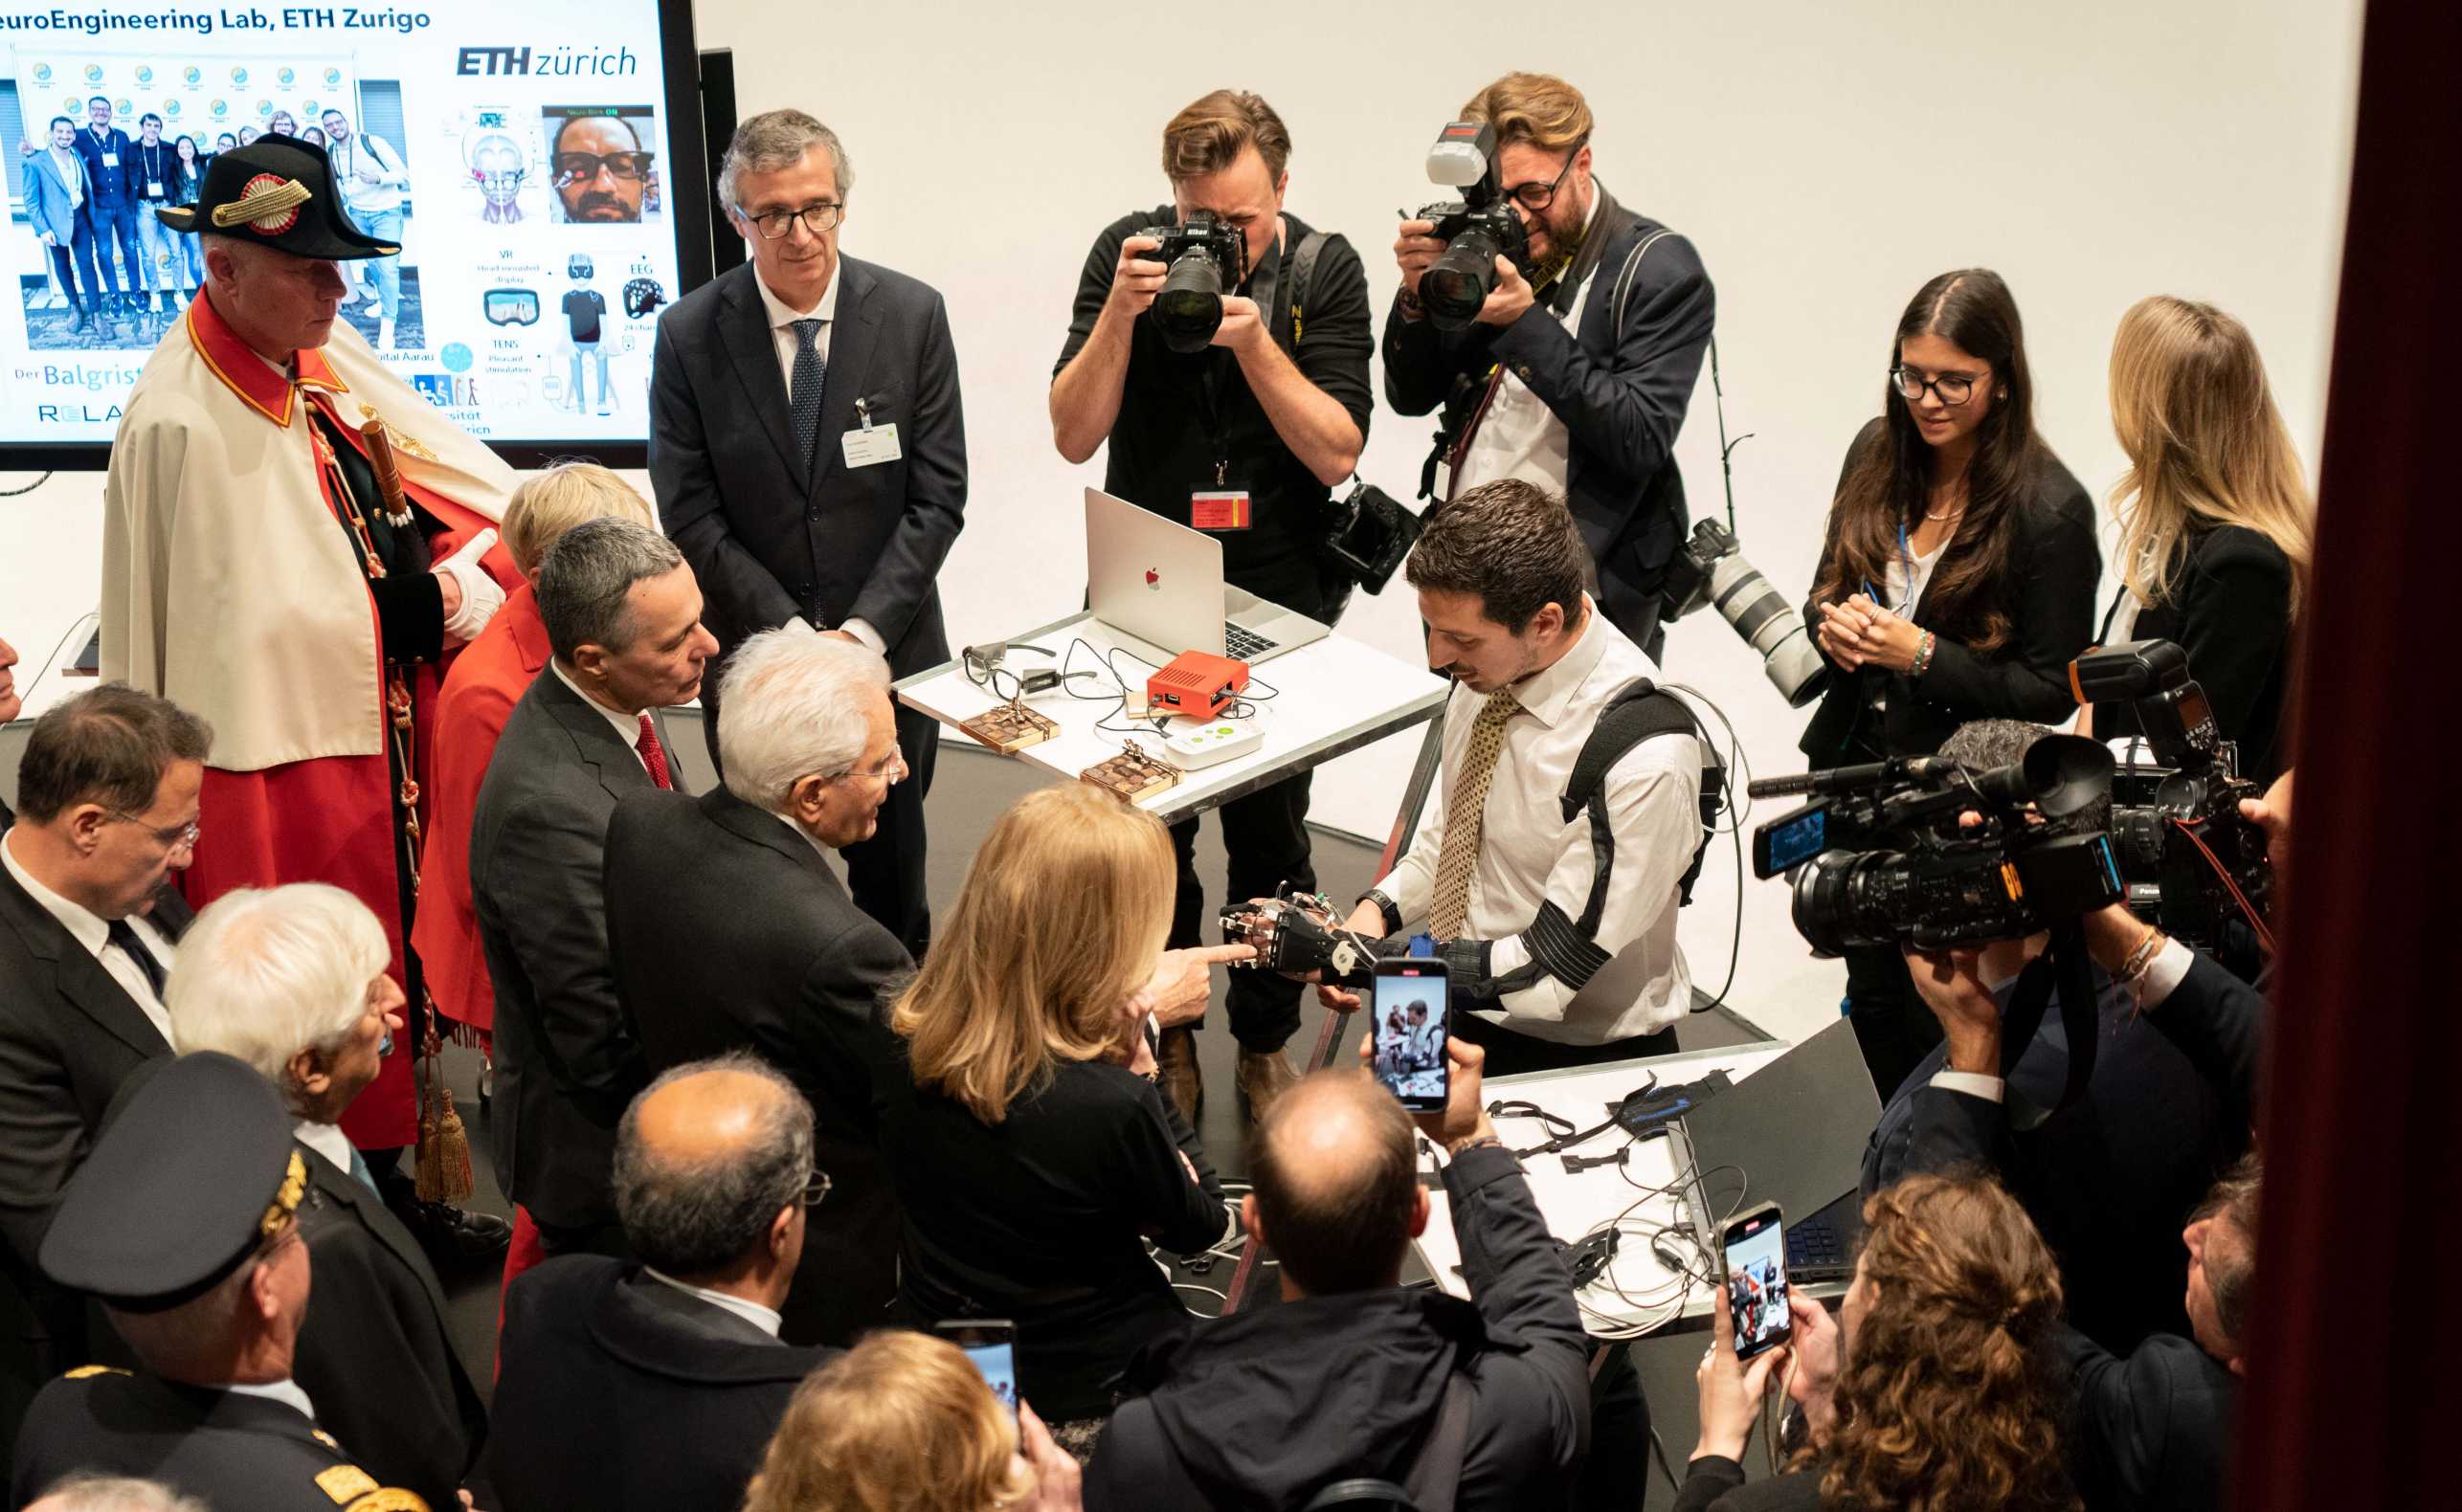 Group of people gathered around a man in a white shirt looking at a robot.